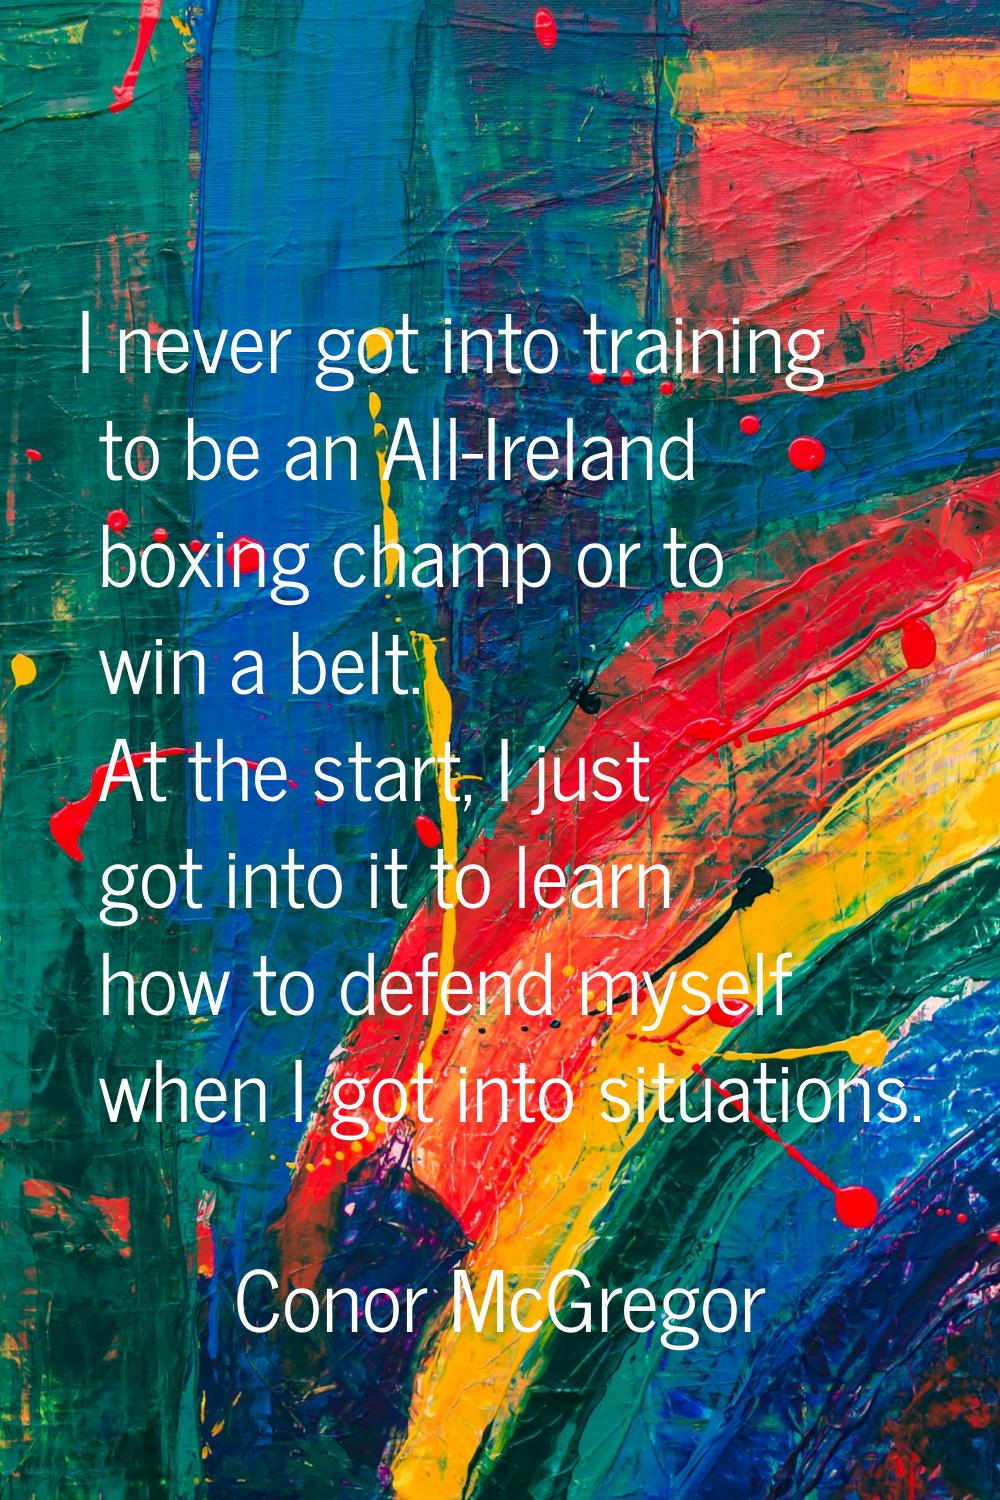 I never got into training to be an All-Ireland boxing champ or to win a belt. At the start, I just 